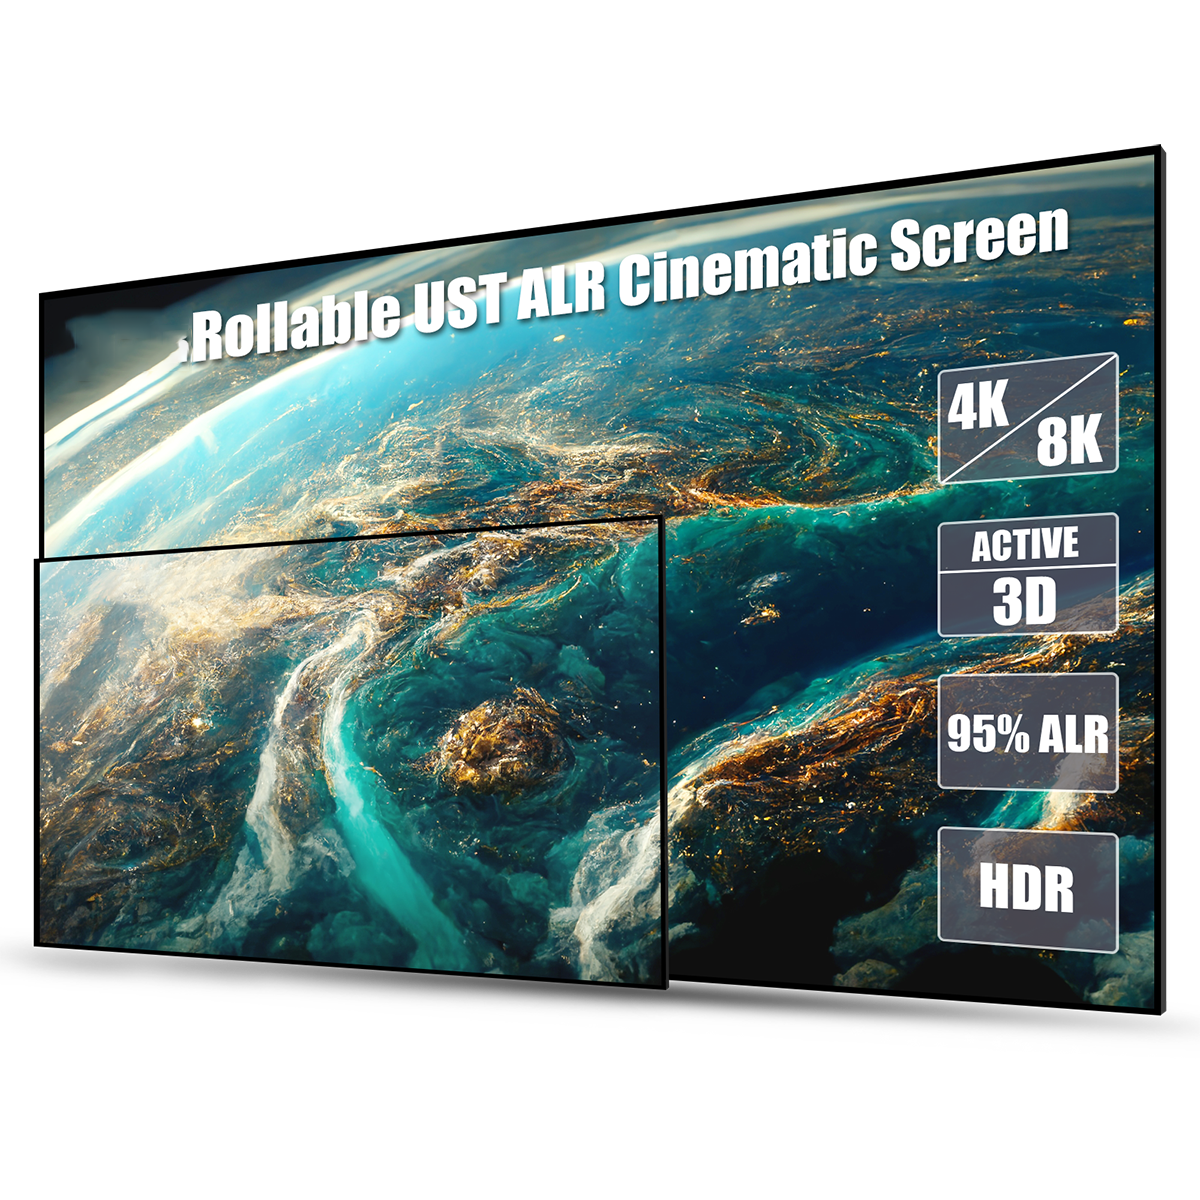 best price,awol,120inch,alr,projector,cinematic,screen,ust,eu,discount